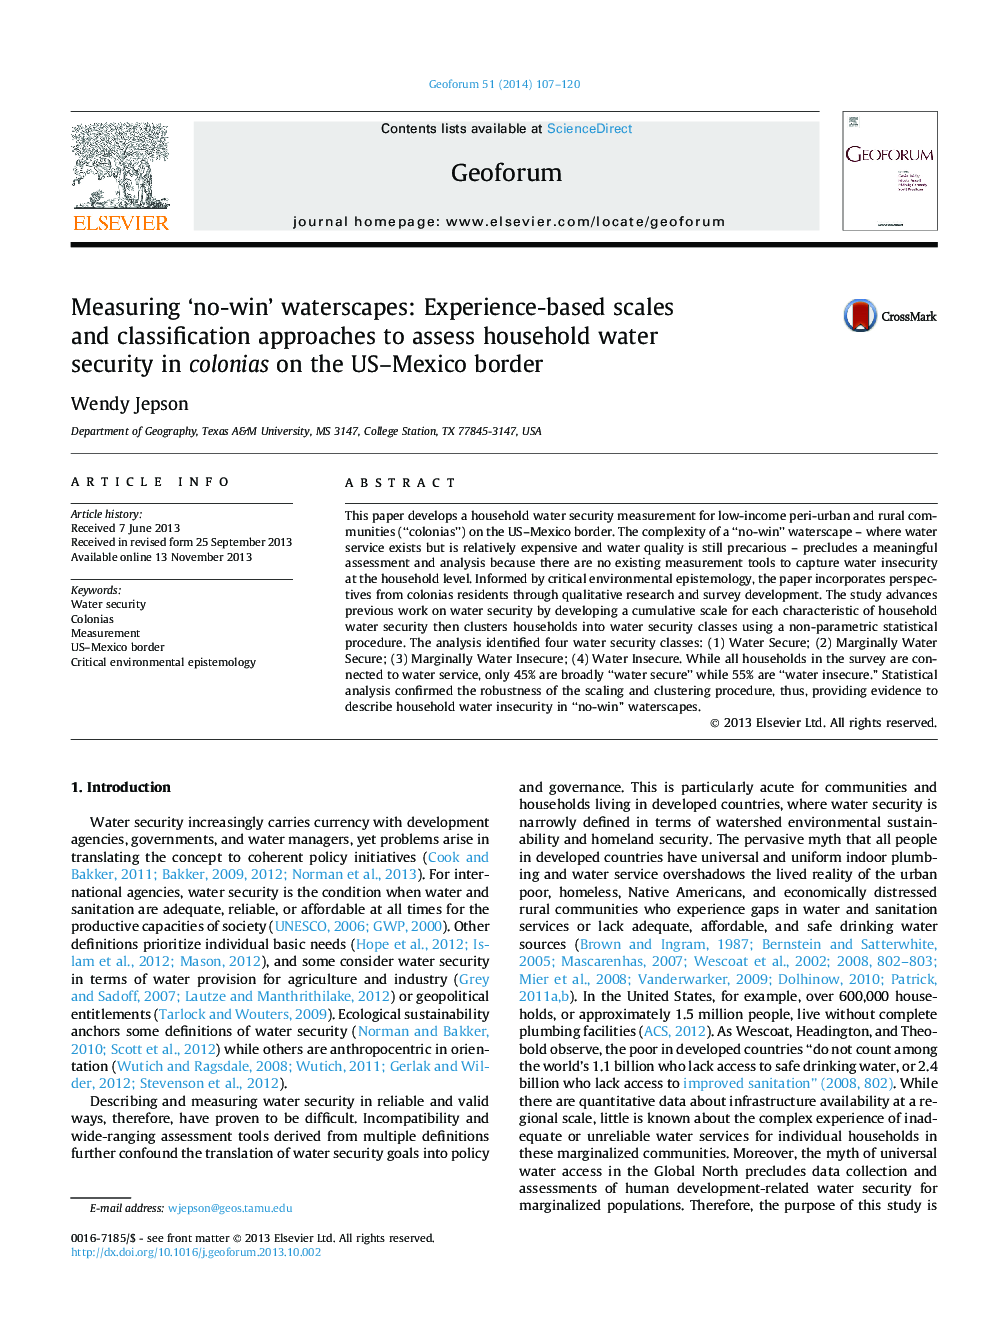 Measuring 'no-win' waterscapes: Experience-based scales and classification approaches to assess household water security in colonias on the US-Mexico border